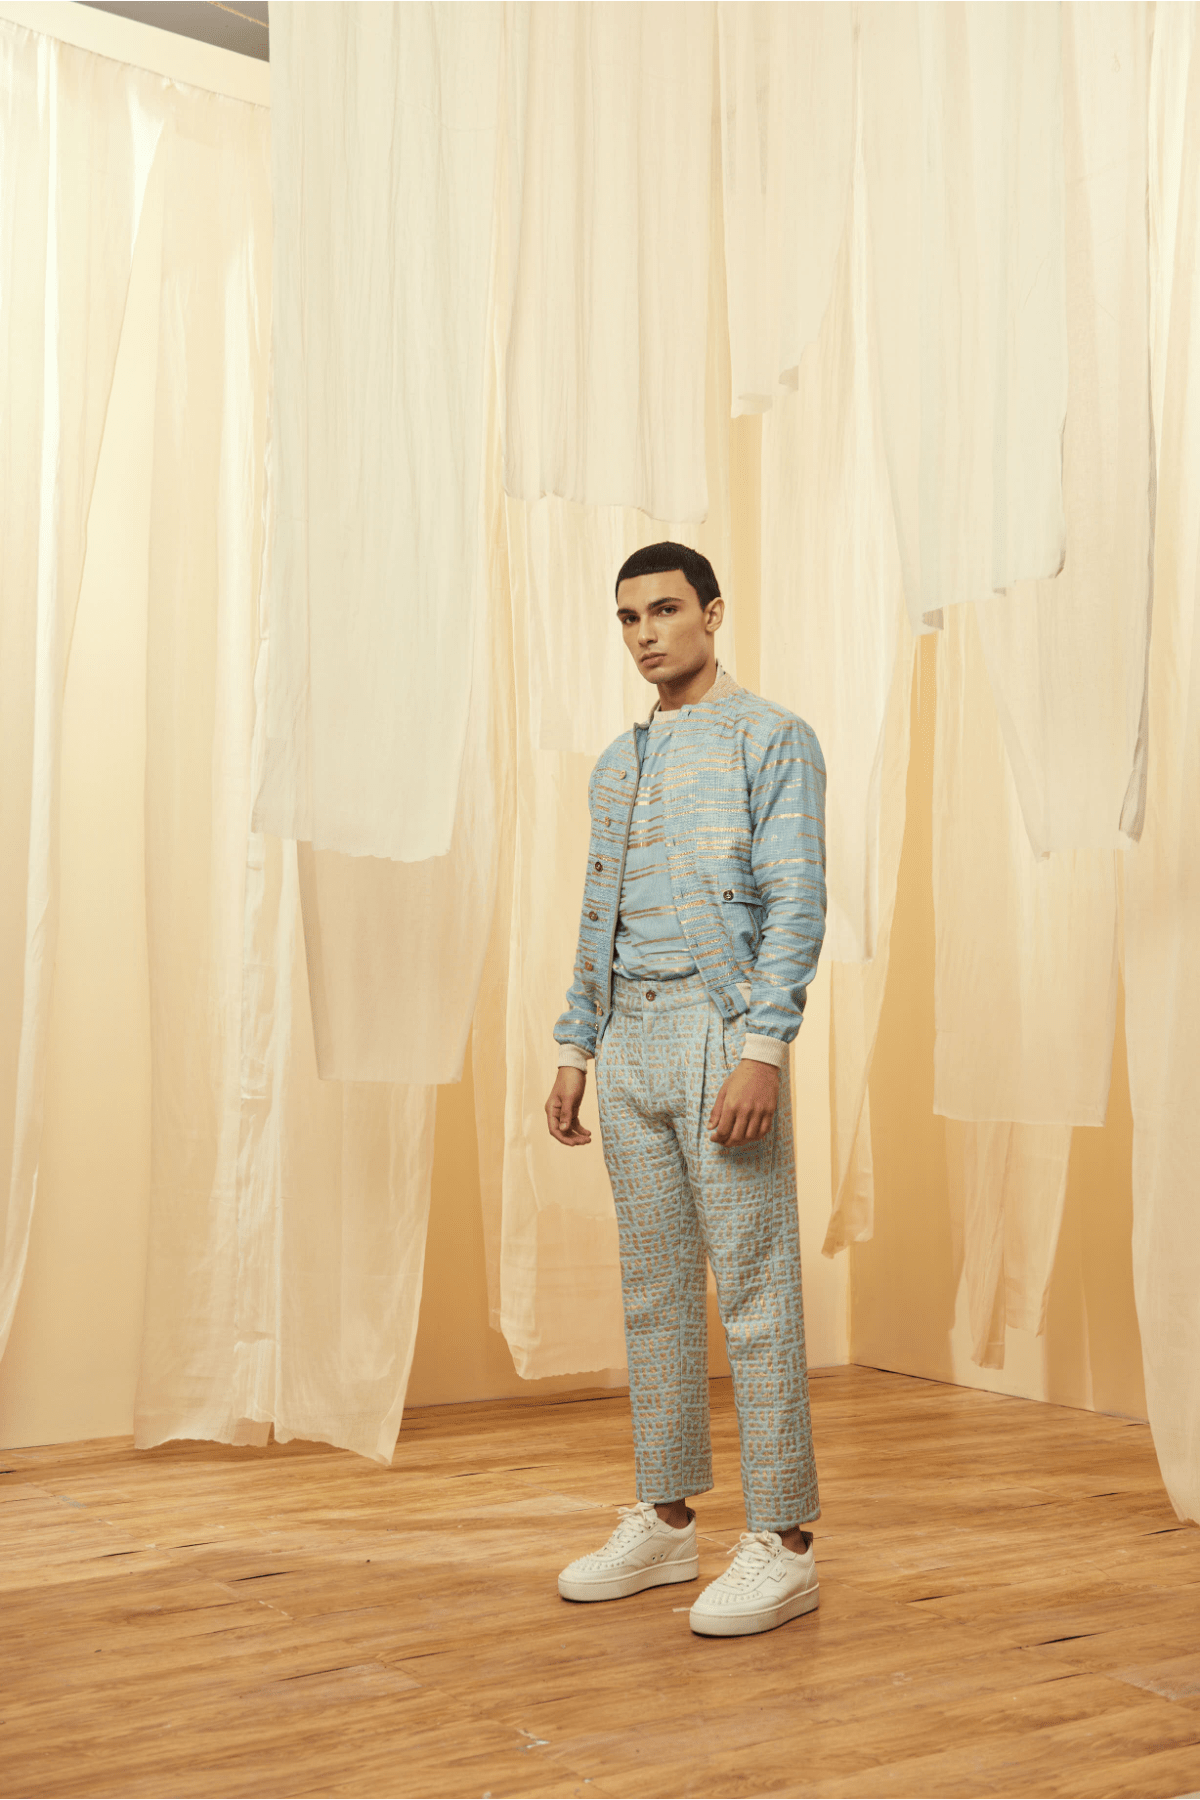 Blue Bomber Jacket with a Blue Poloneck and Blue Trousers - Kunal Anil Tanna